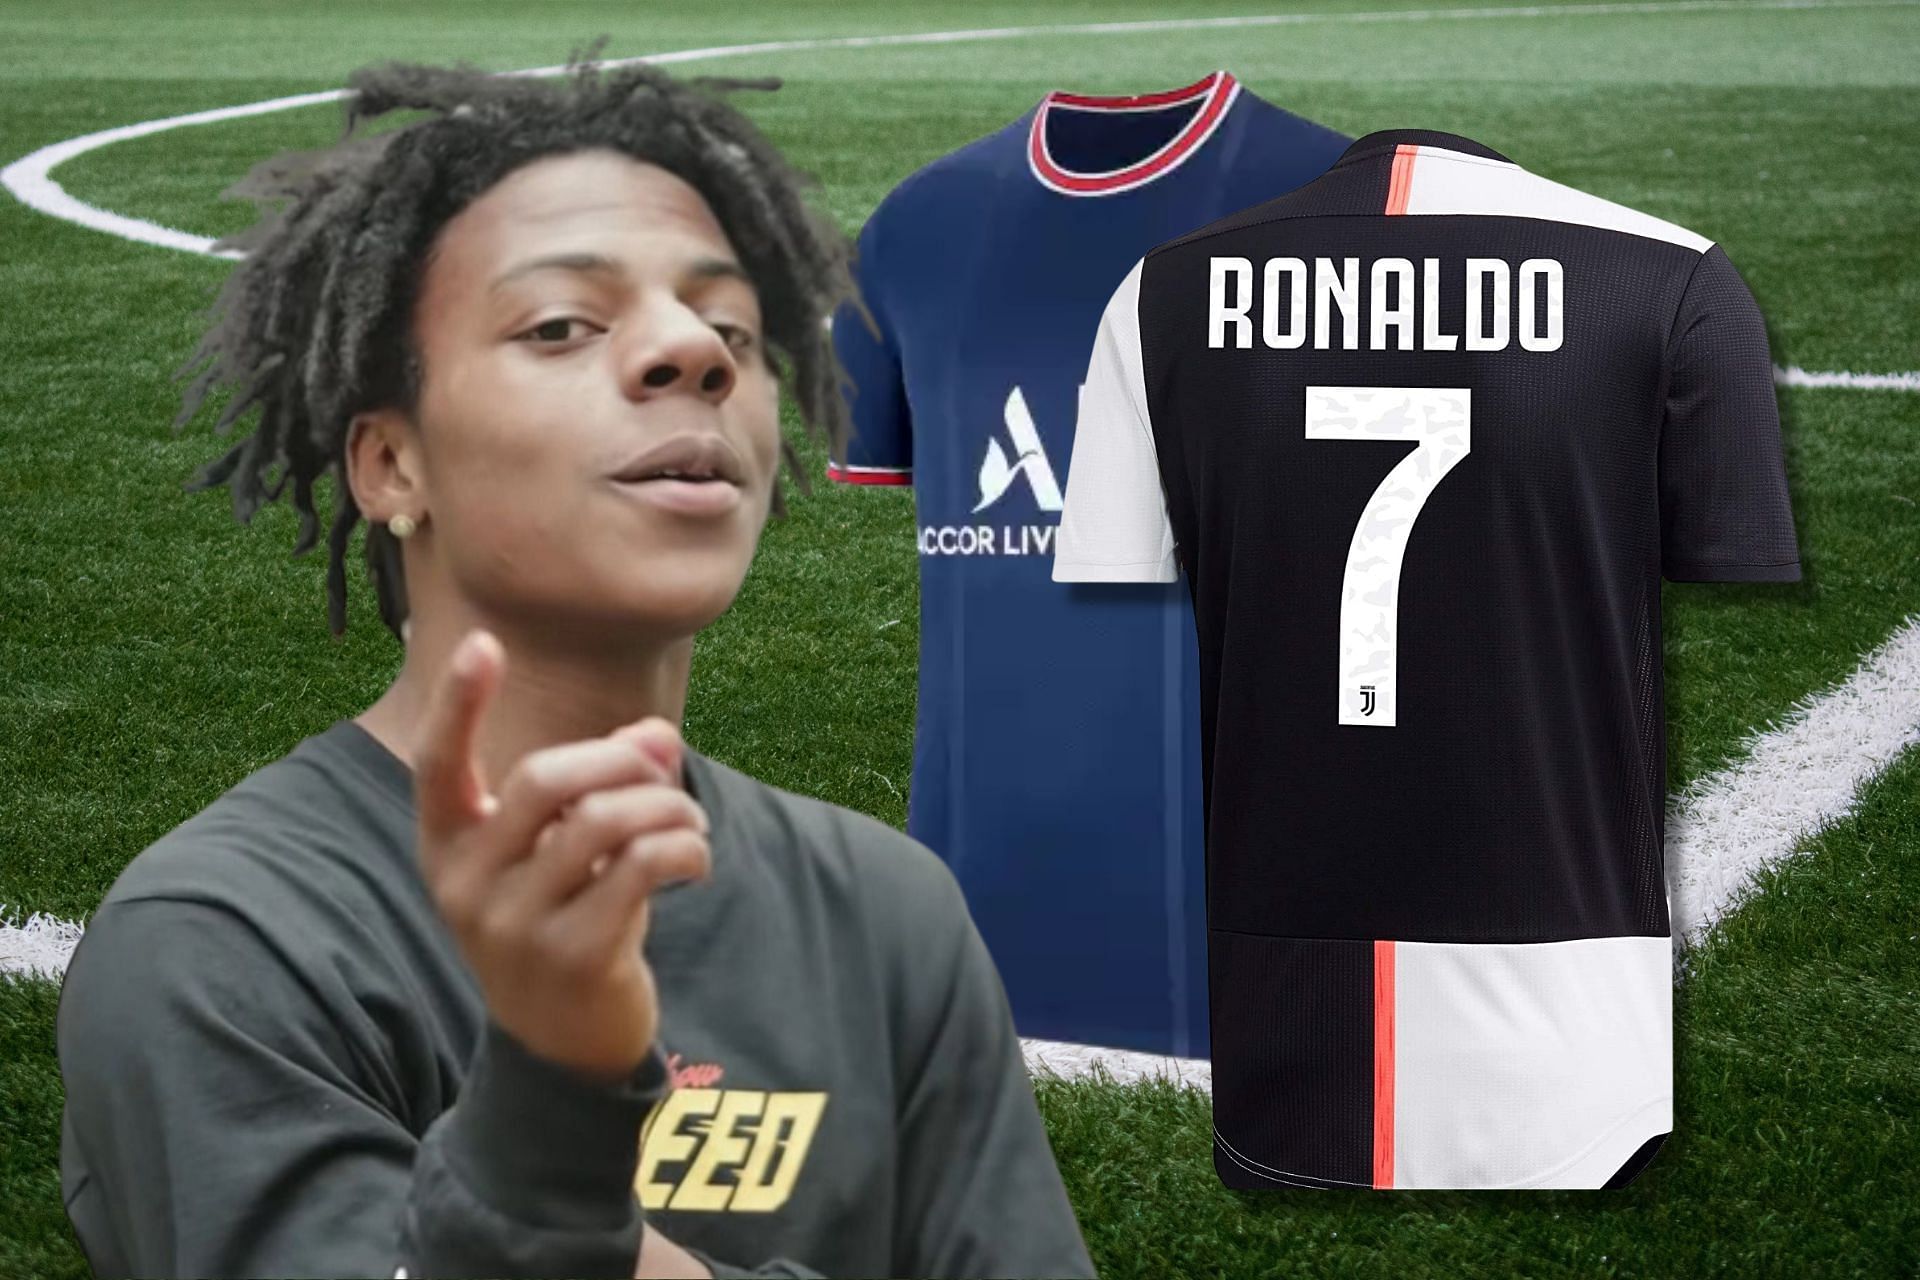 iShowSpeed really pulled up to prom in a Ronaldo Jersey and foam